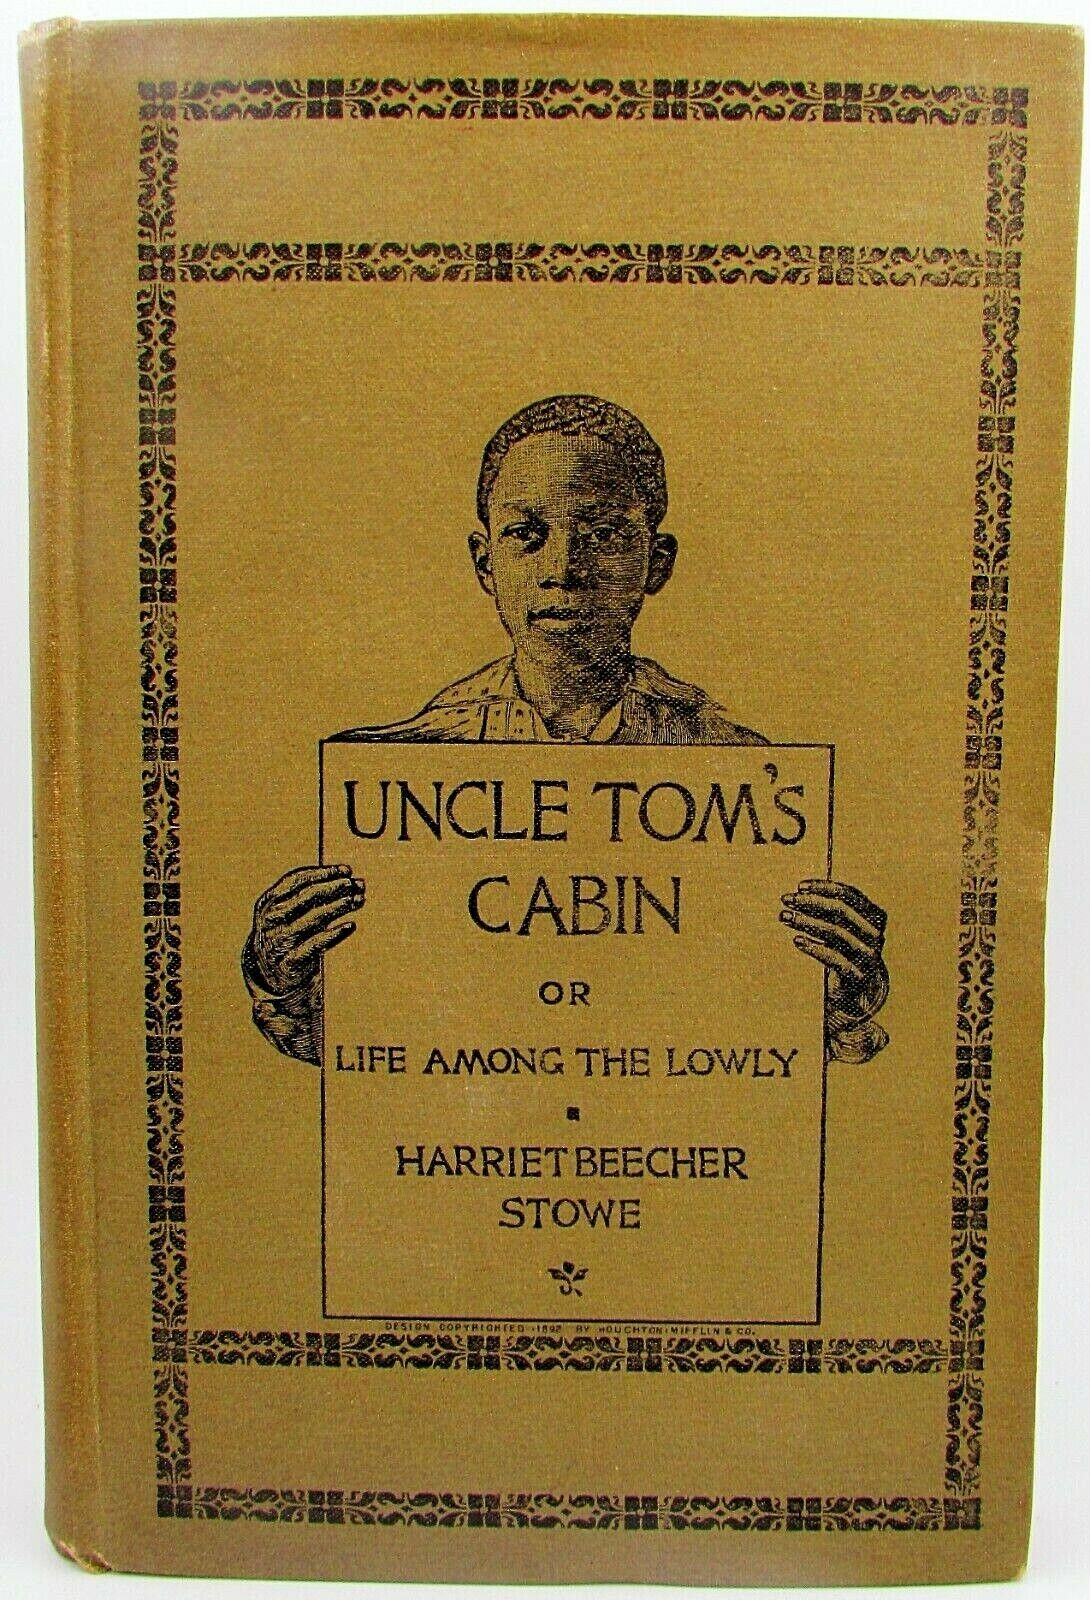 UNCLE TOM\'S CABIN Life Among the Lowly Harriet Beecher Stowe 1892 Universal Ed.